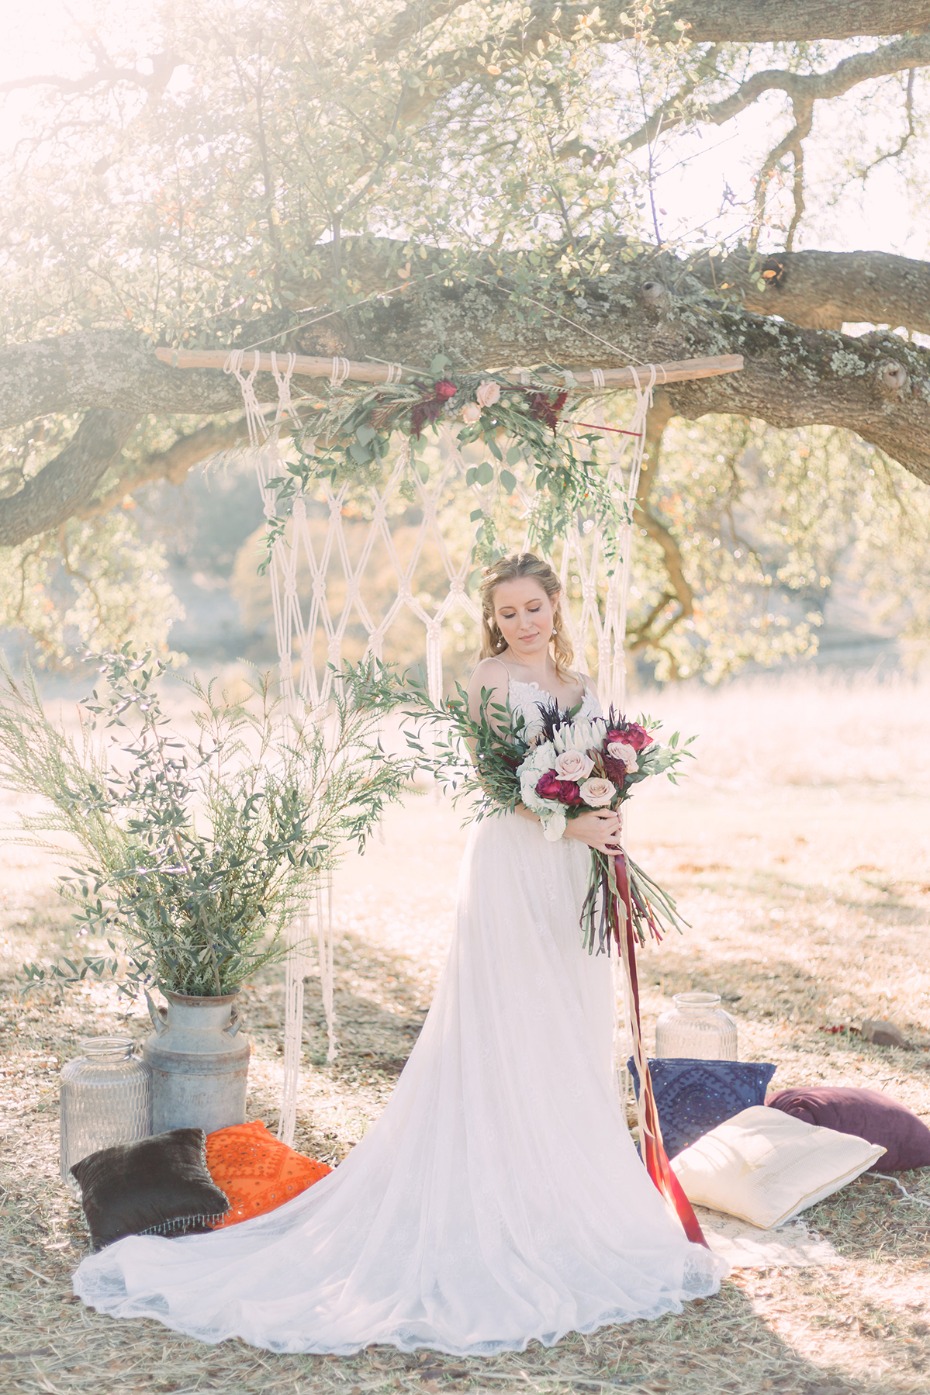 Have a bohemian styled ceremony